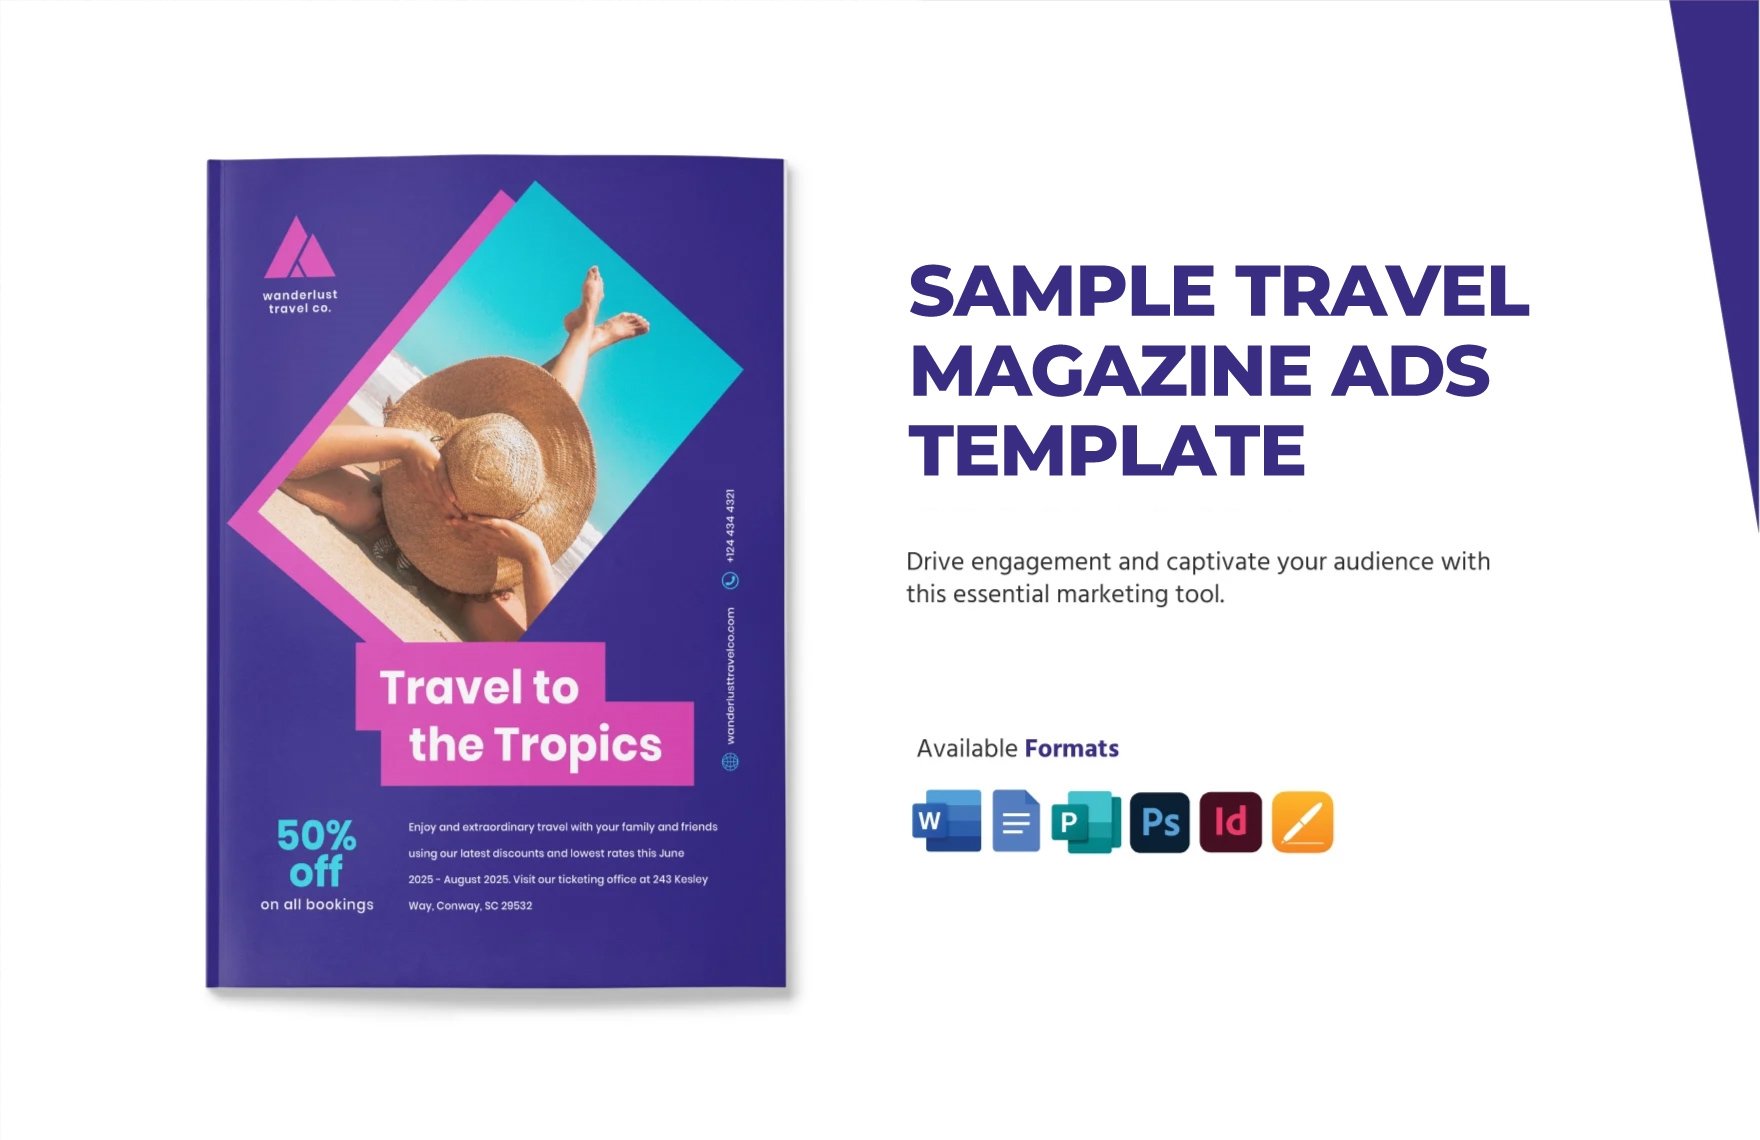 Sample Travel Magazine Ads Template in Word, Google Docs, PSD, Apple Pages, Publisher, InDesign